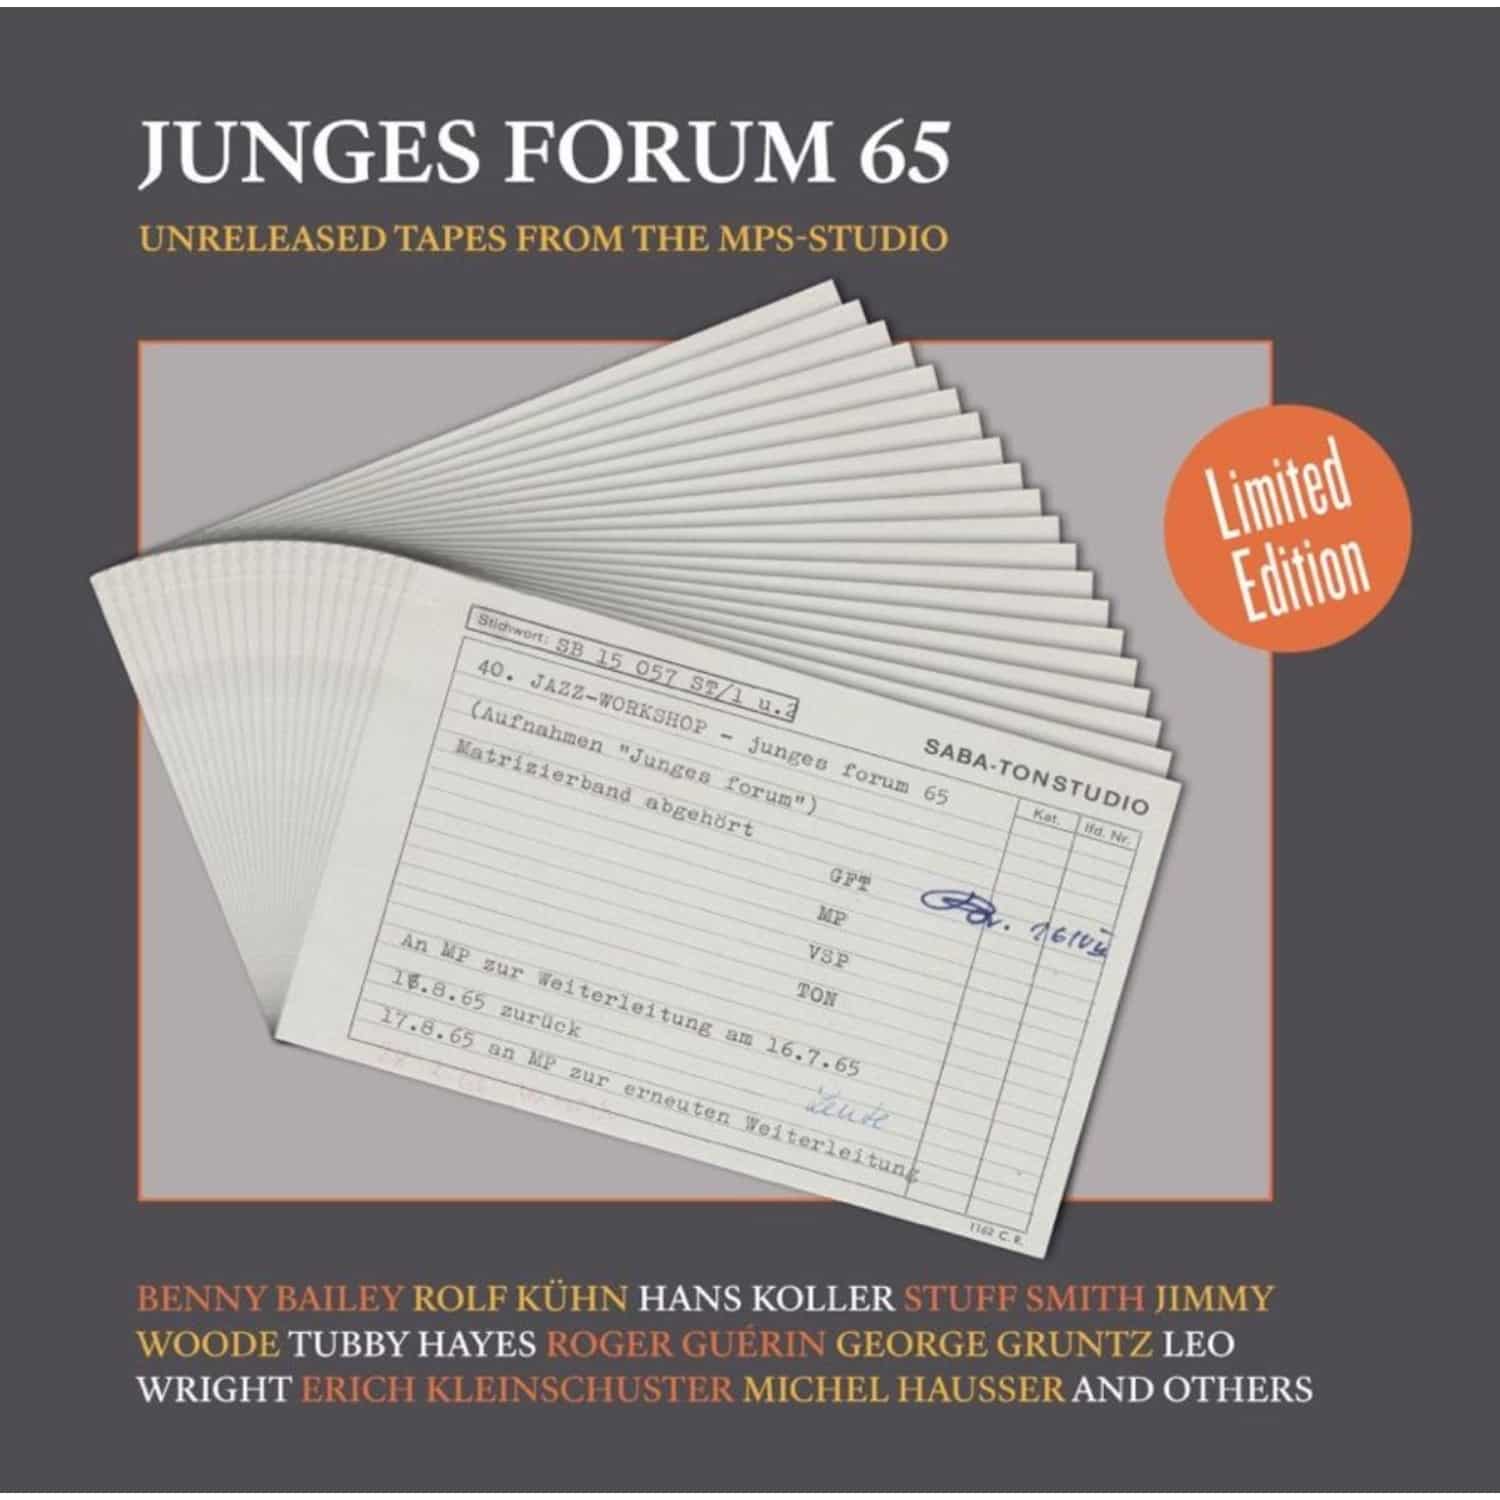 Rolf Khn, Hans Koller, Leo Wright & More - JUNGES FORUM 65 - UNRELEASED TRACKS FROM THE MPS-STUDIO 